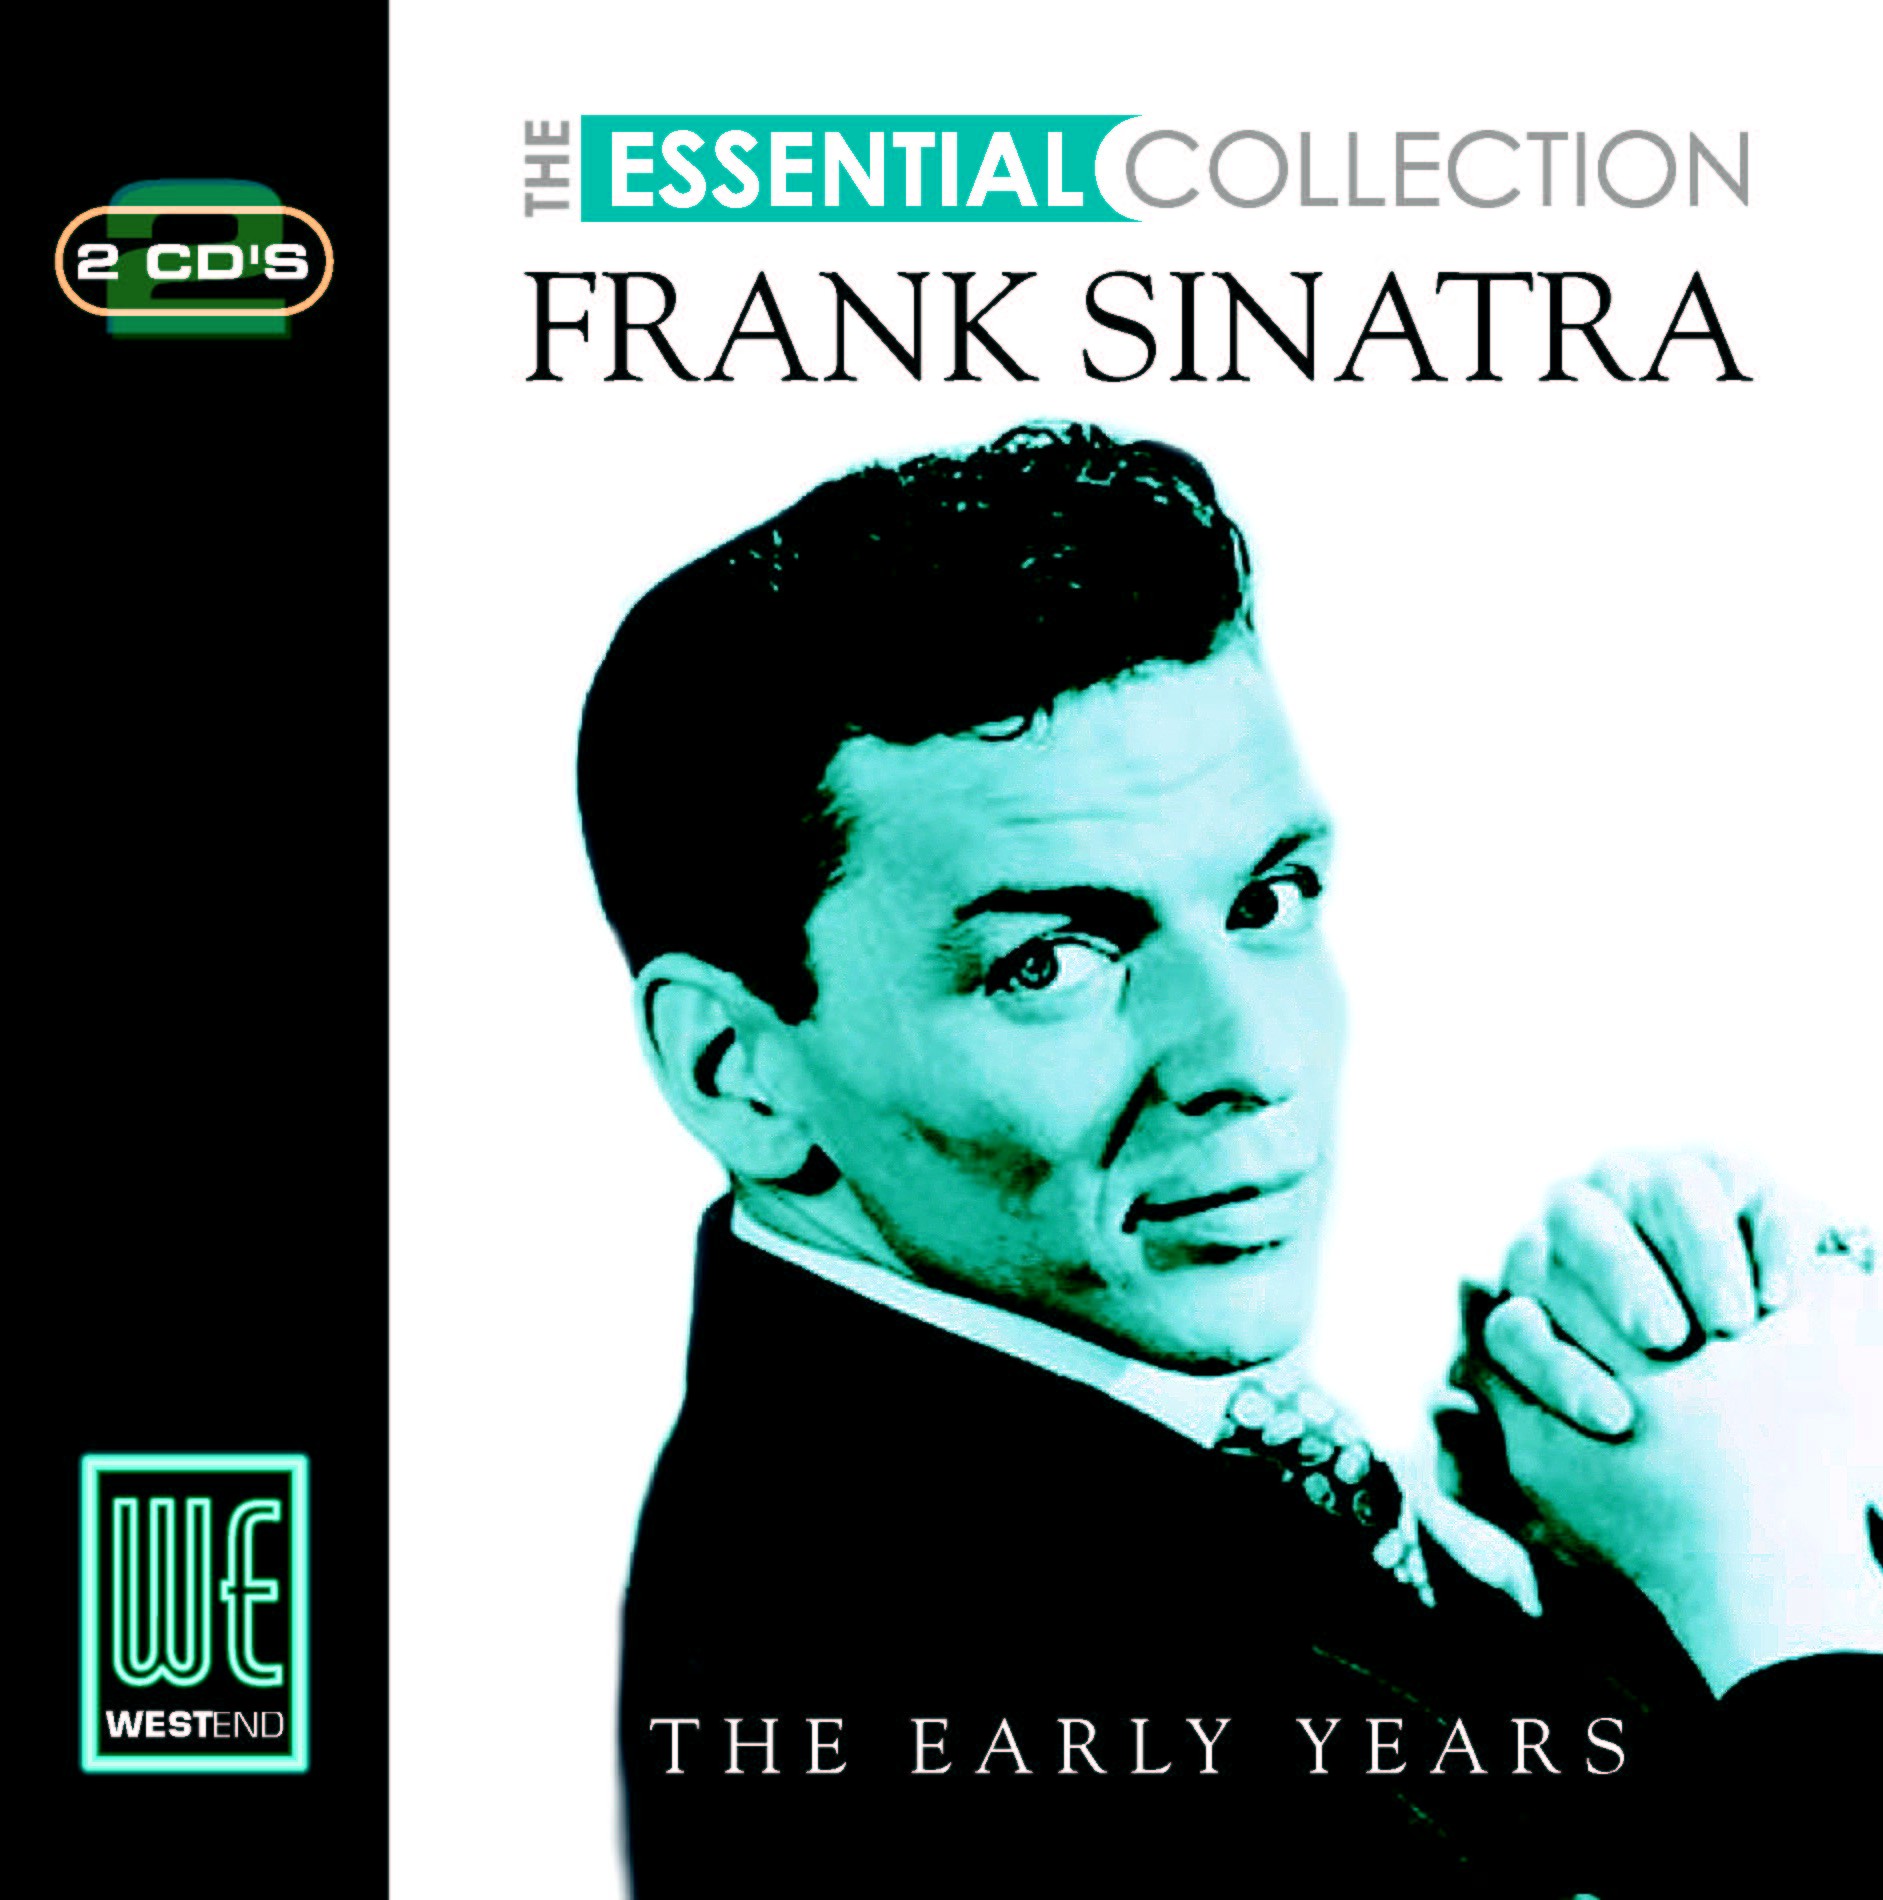 The　Collection　Frank　(2CD)　Sinatra:　Essential